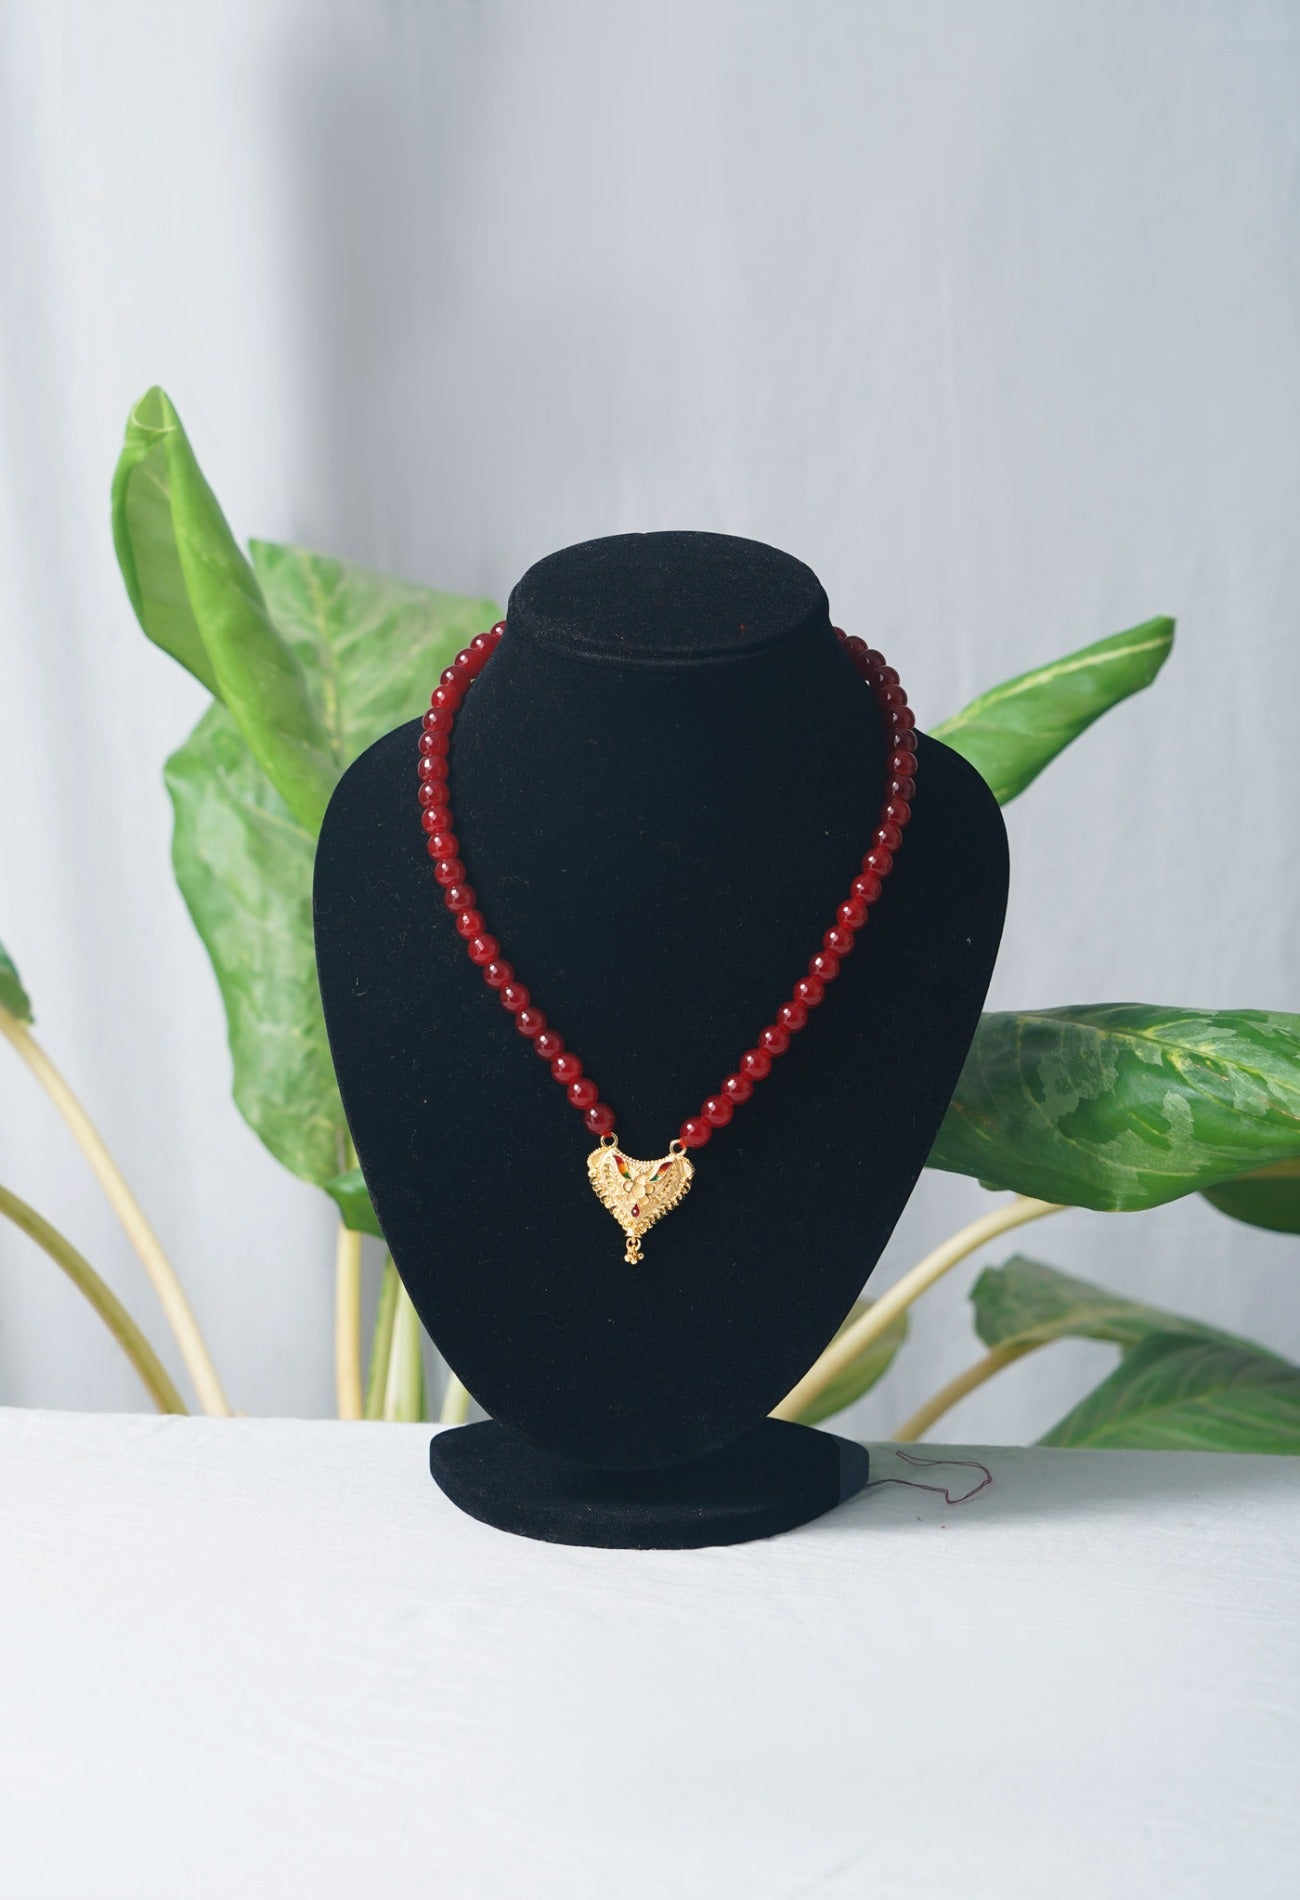 Online Shopping for Red Amravati Round Beads Necklace with Pendent with jewellery from Andhra pradesh at Unnatisilks.com India
